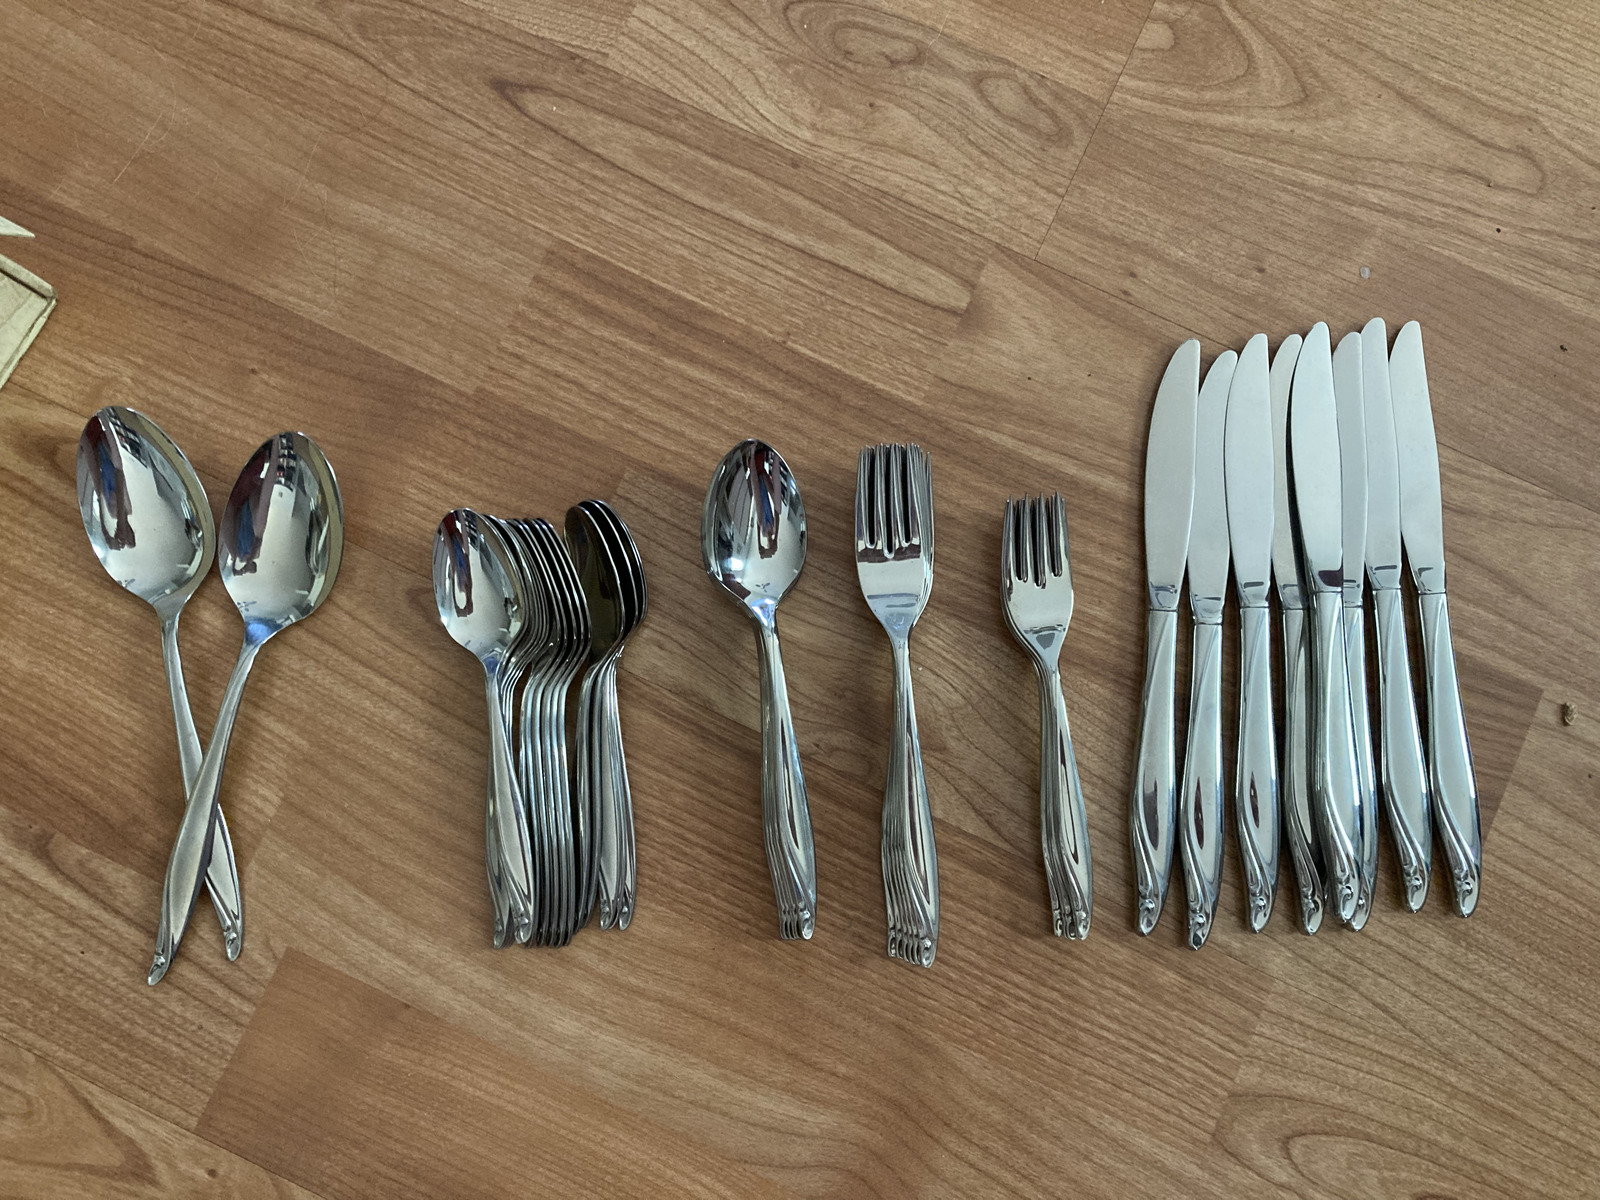 Surf Club Oneida Wm Rogers Stainless Waves Oceans Flatware Set for 8